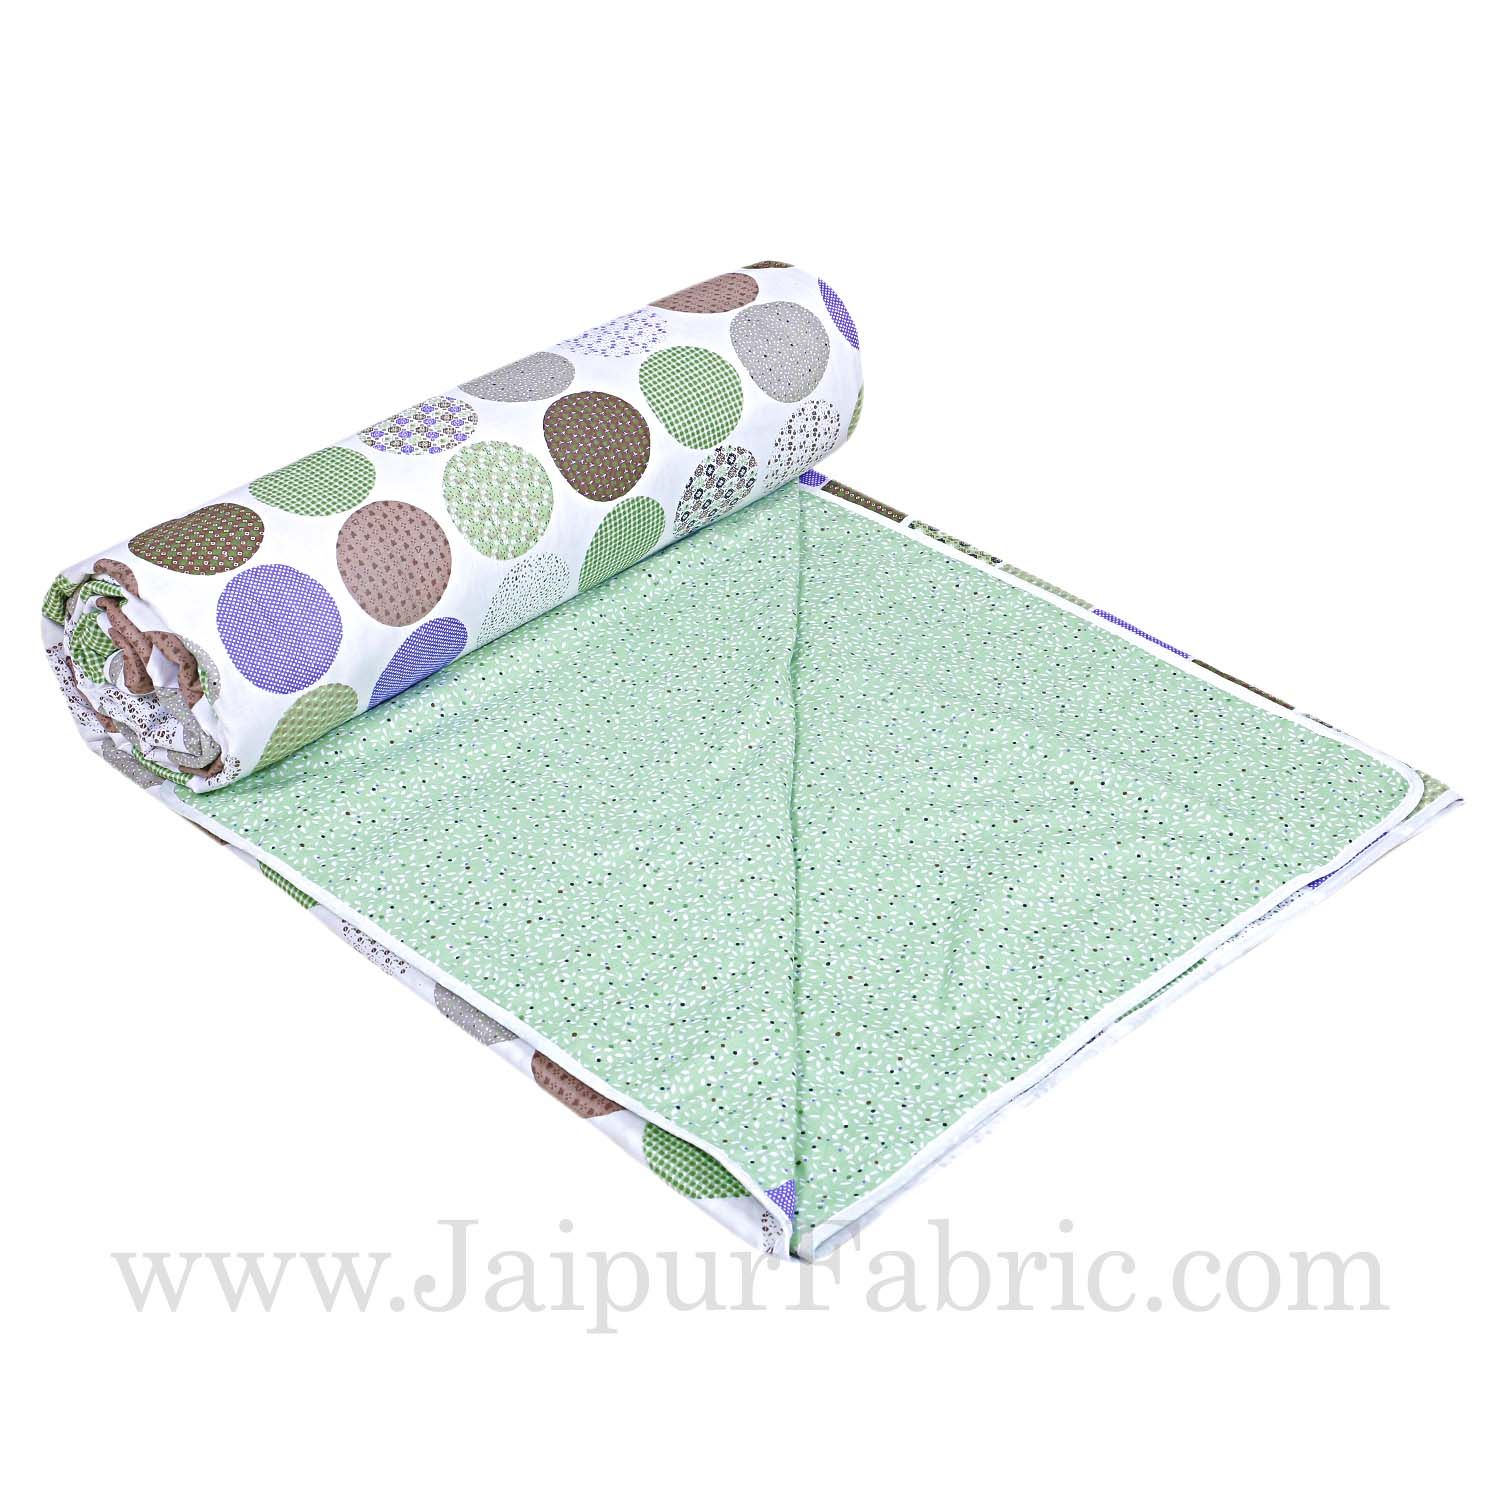 Cambric Cotton Double bed Reversible Dohar with glorious green Polka Dots